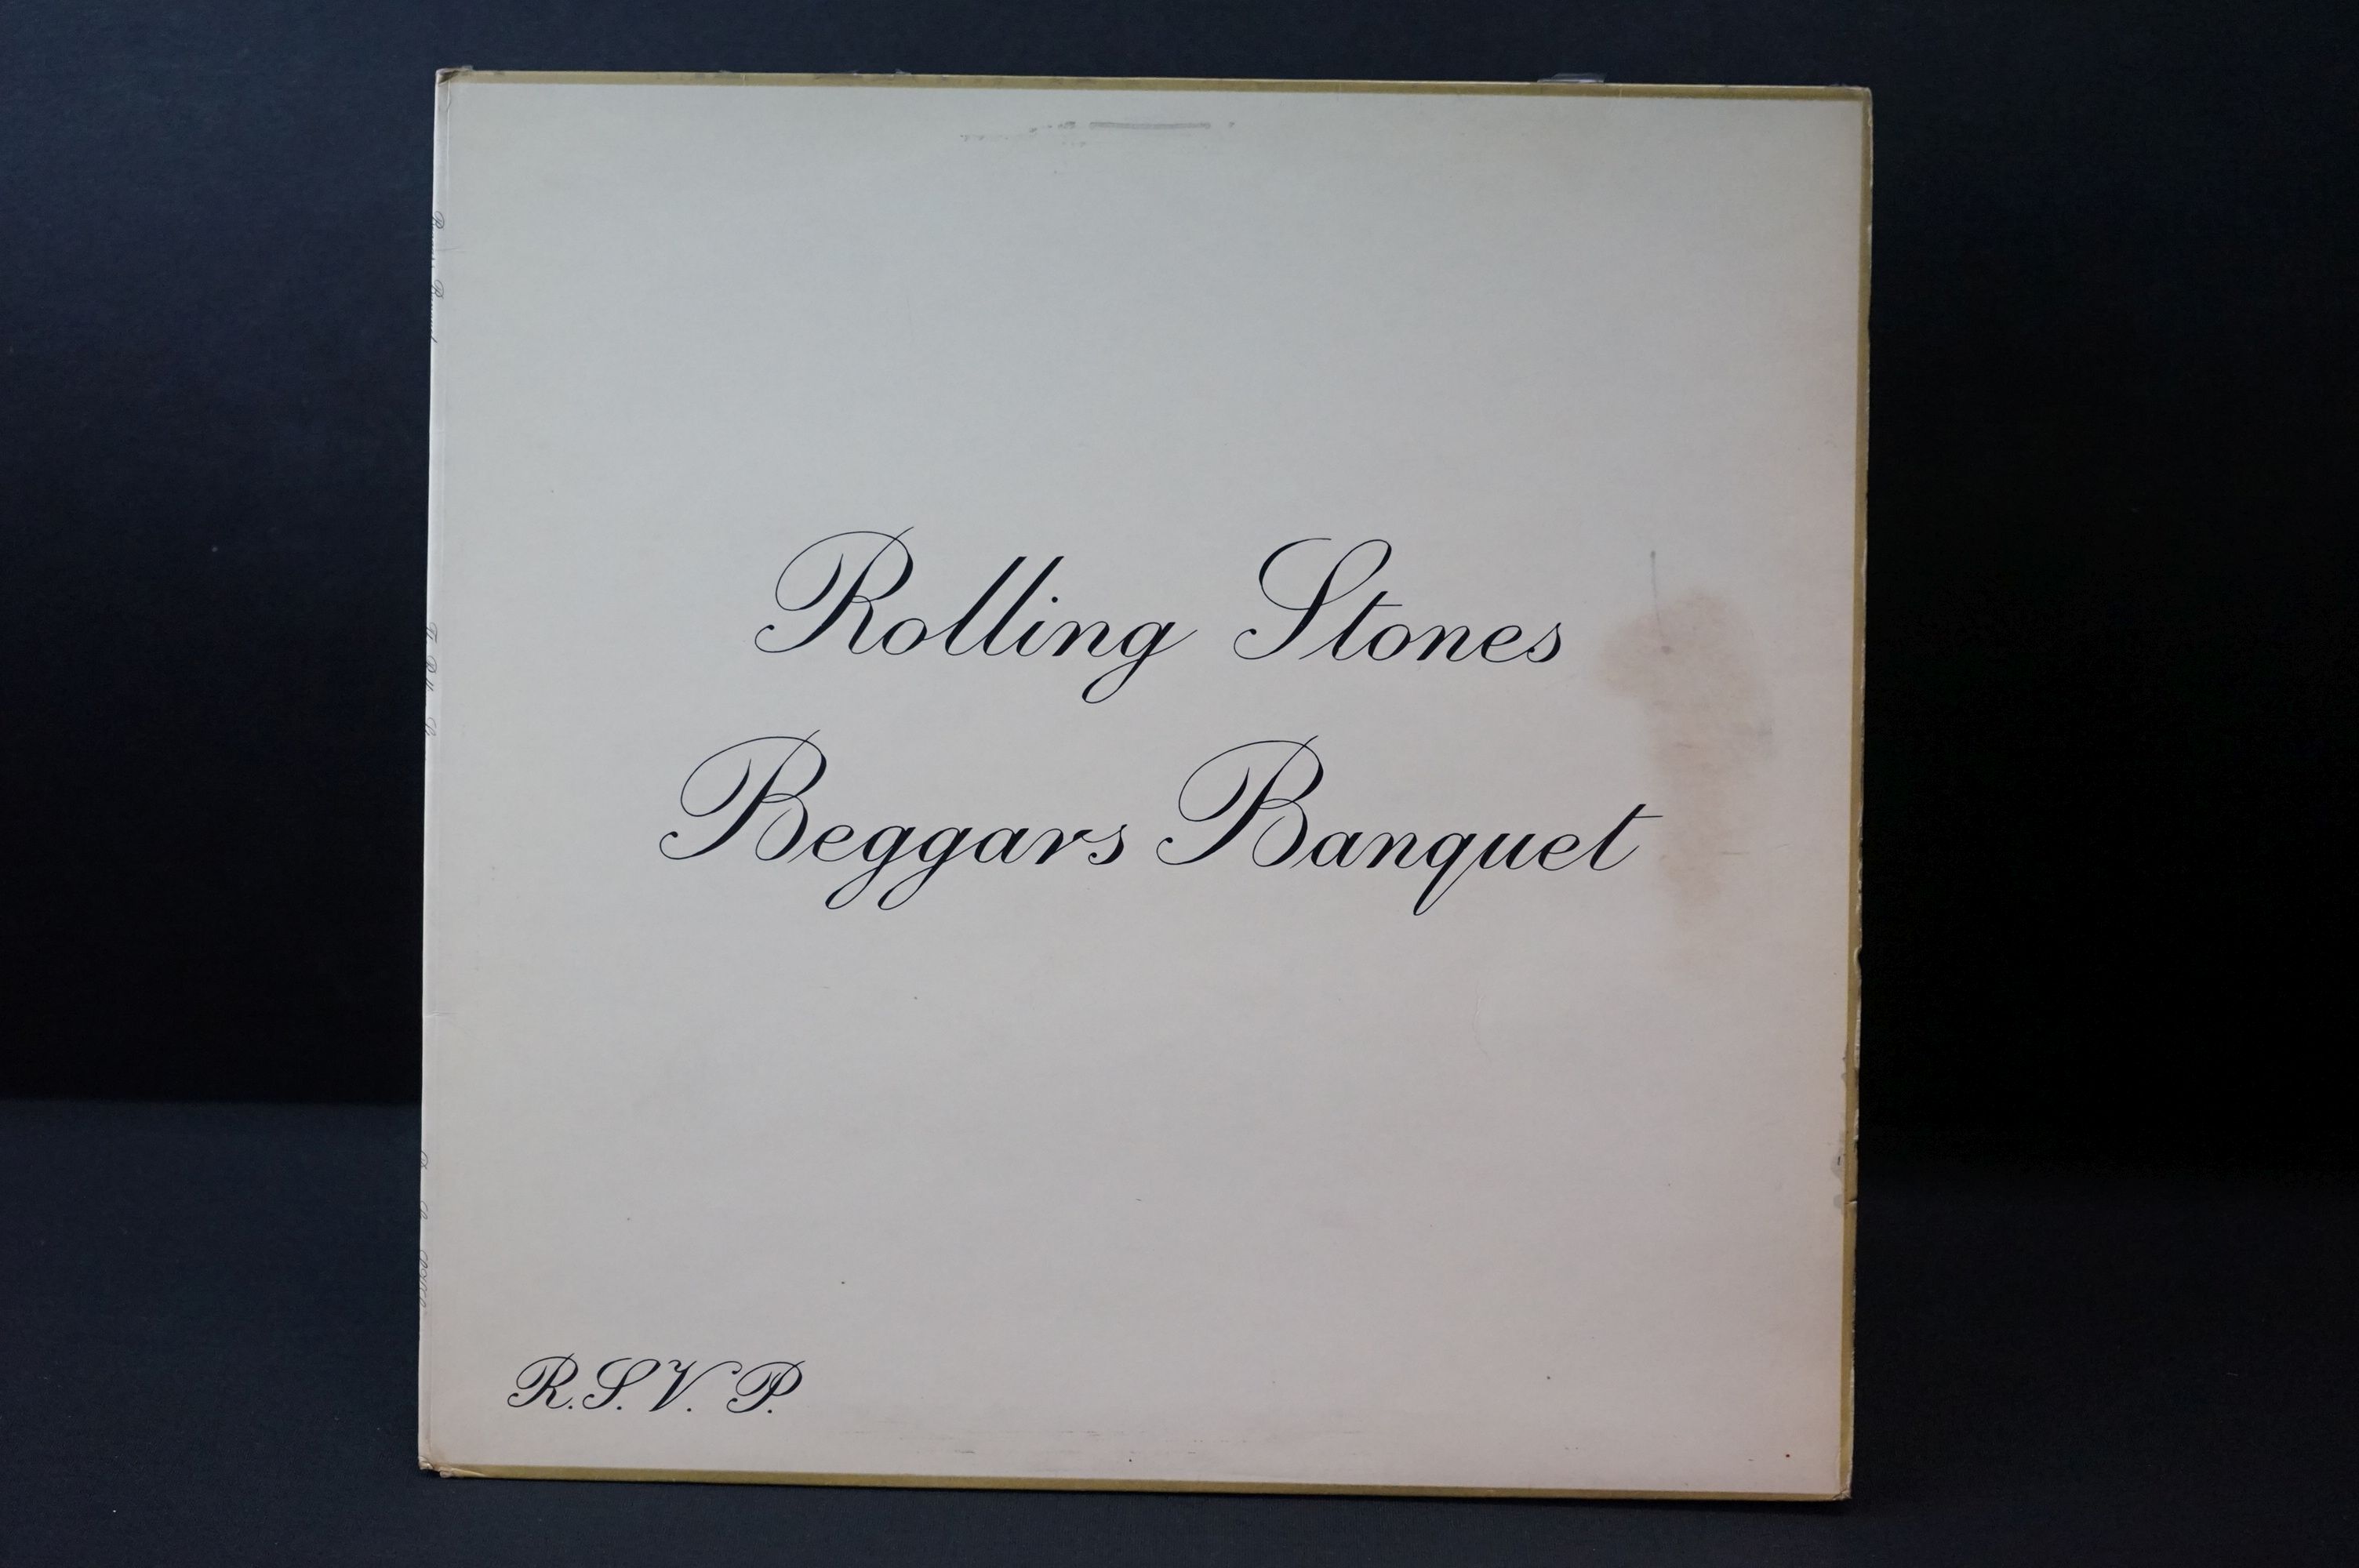 Vinyl - The Rolling Stones Beggars Banquet. Original UK 1st pressing Stereo copy with unboxed